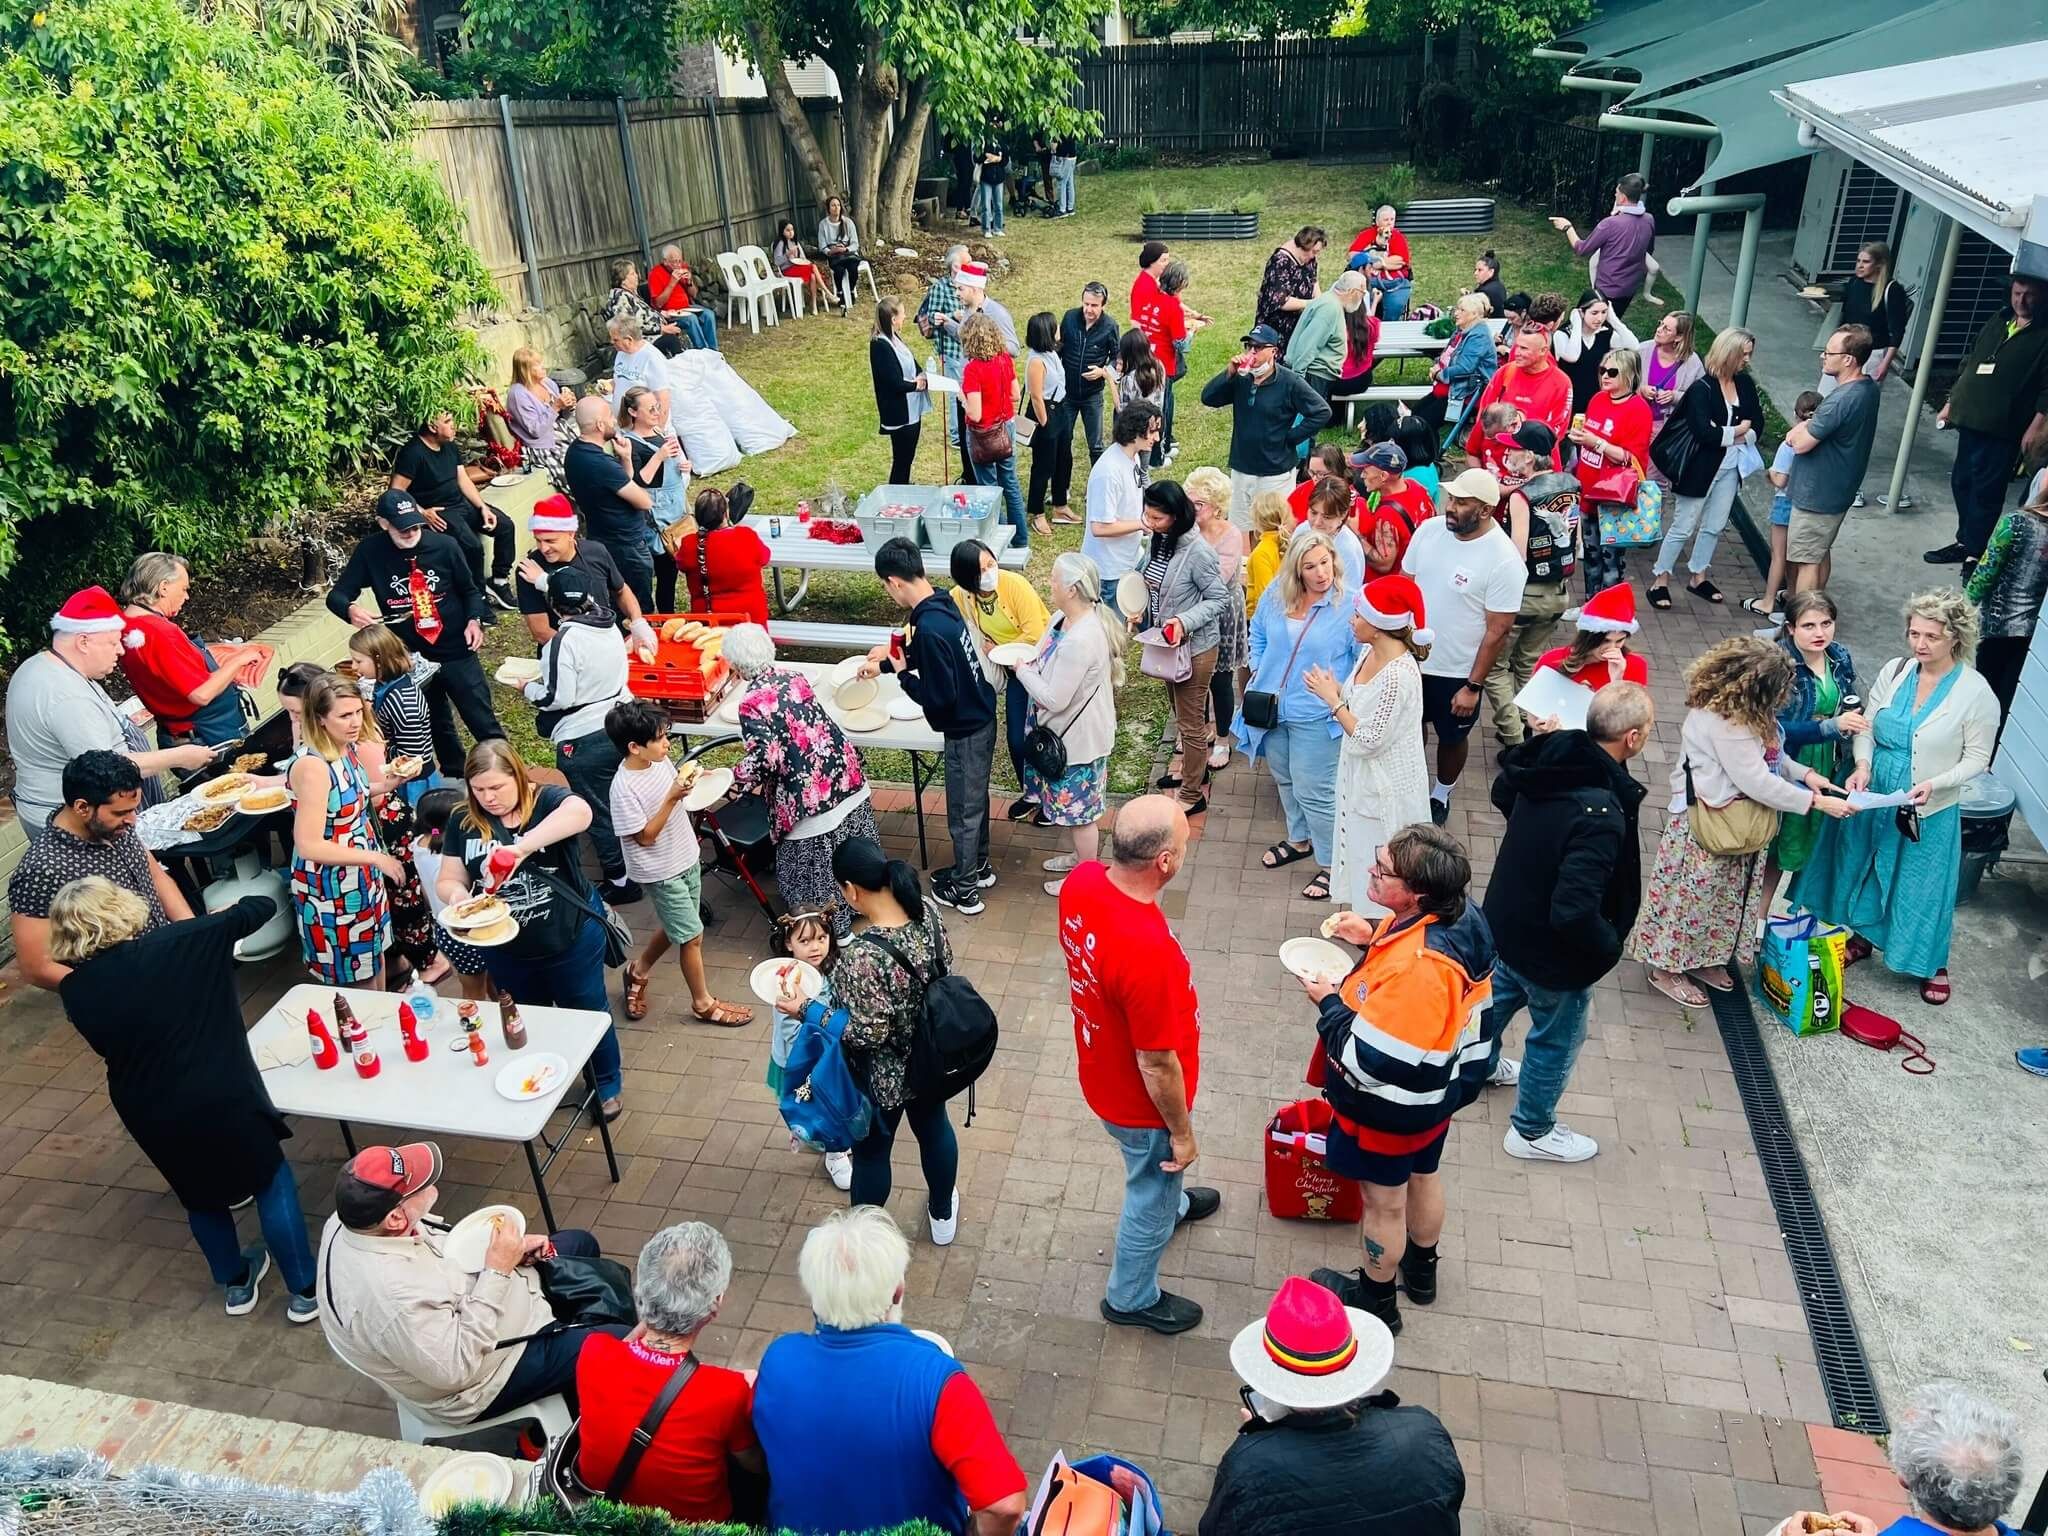 Rozelle All-Abilities Christmas Carols brings local community together at the newly rennovated Together2 space.